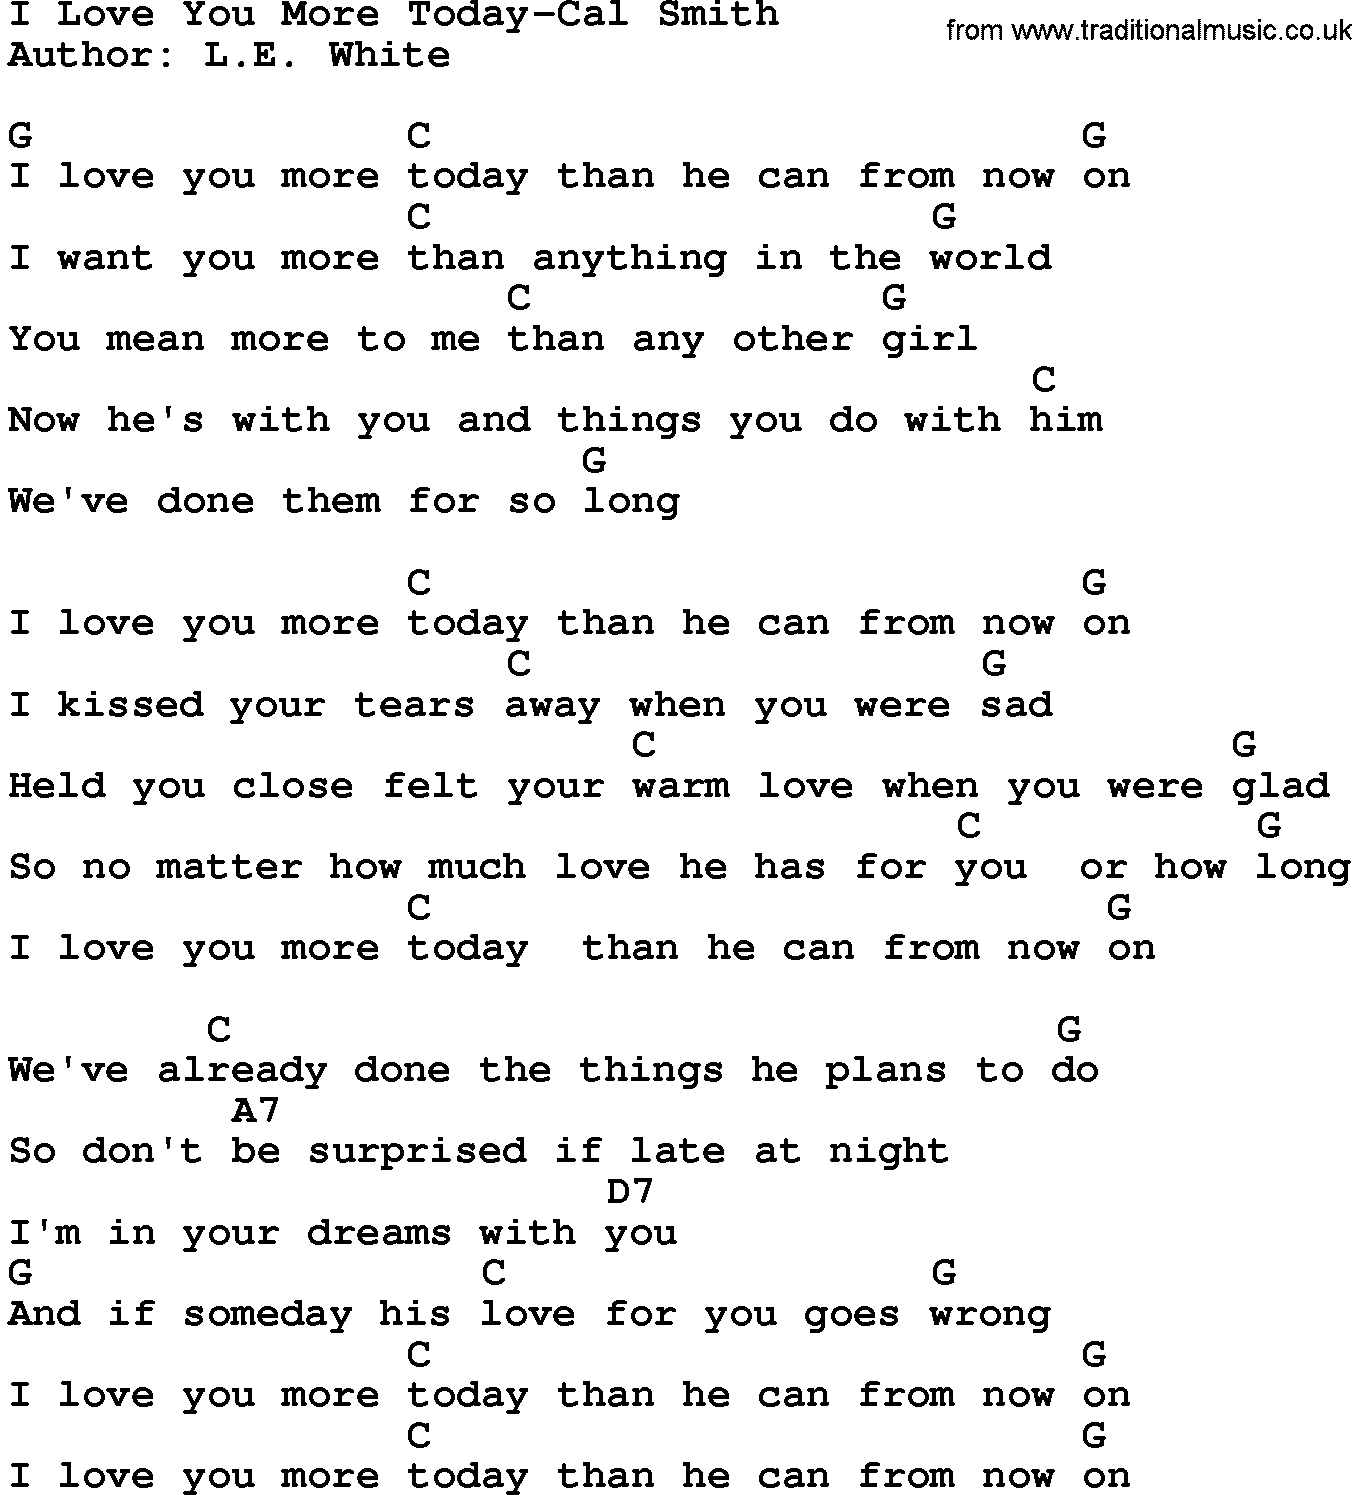 Country music song: I Love You More Today-Cal Smith lyrics and chords